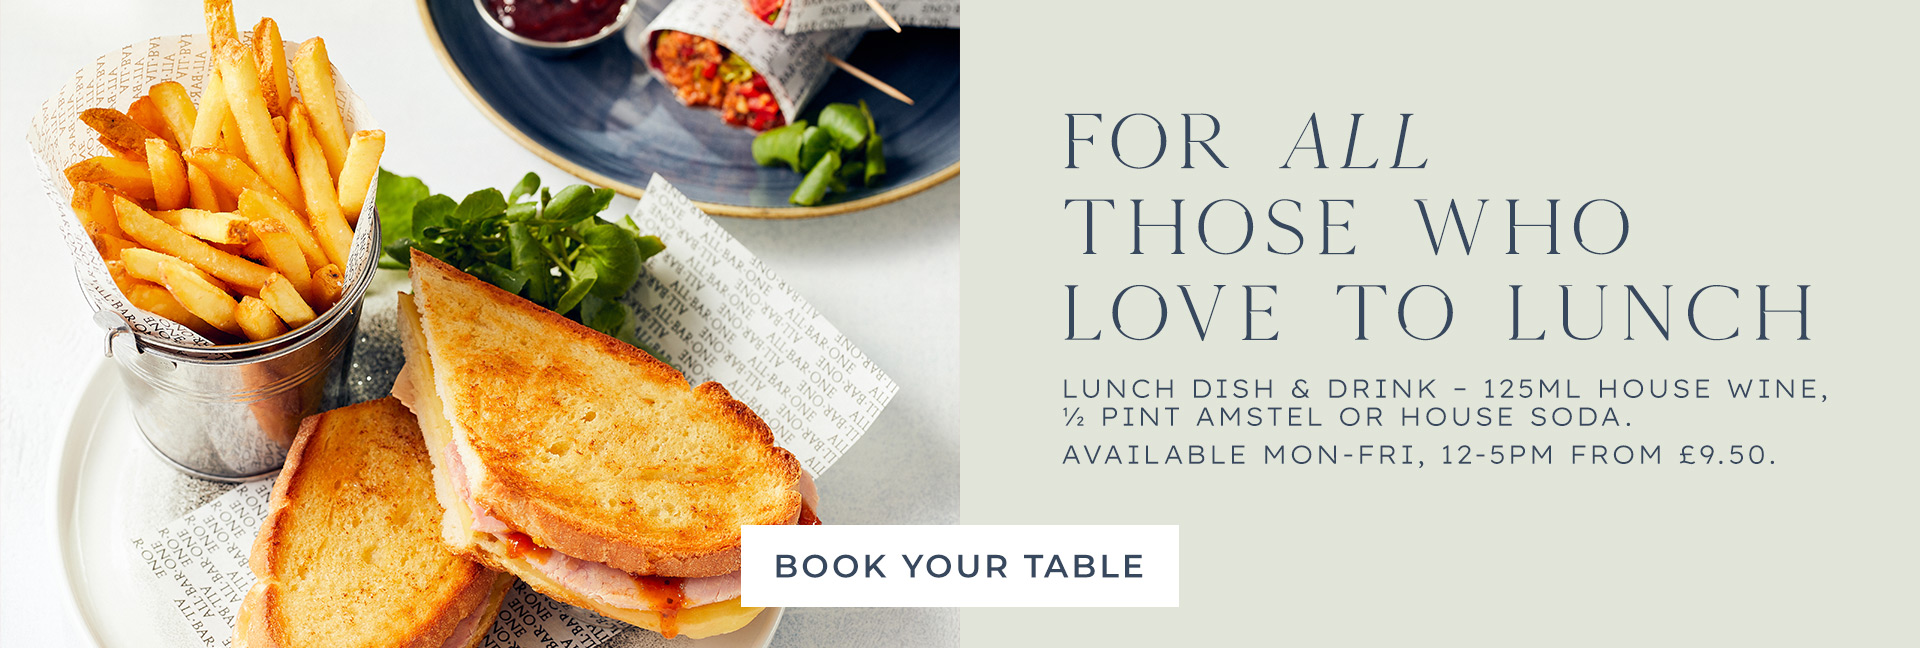 Lunch Offer at All Bar One Manchester